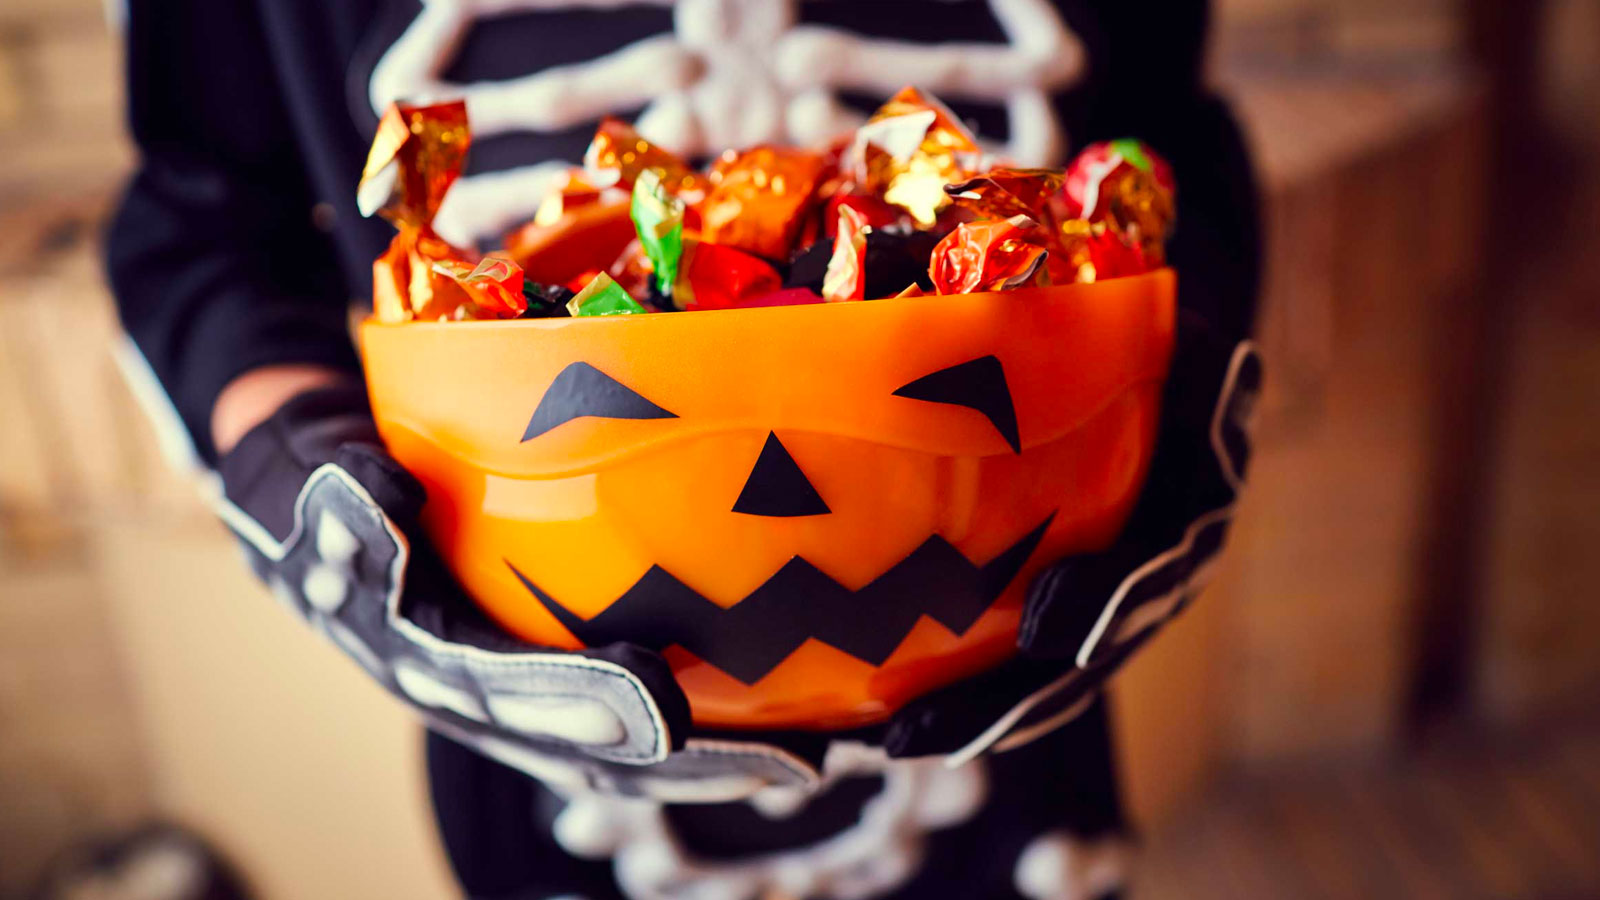 What Halloween Costume Should You Wear This Year? Halloween candy